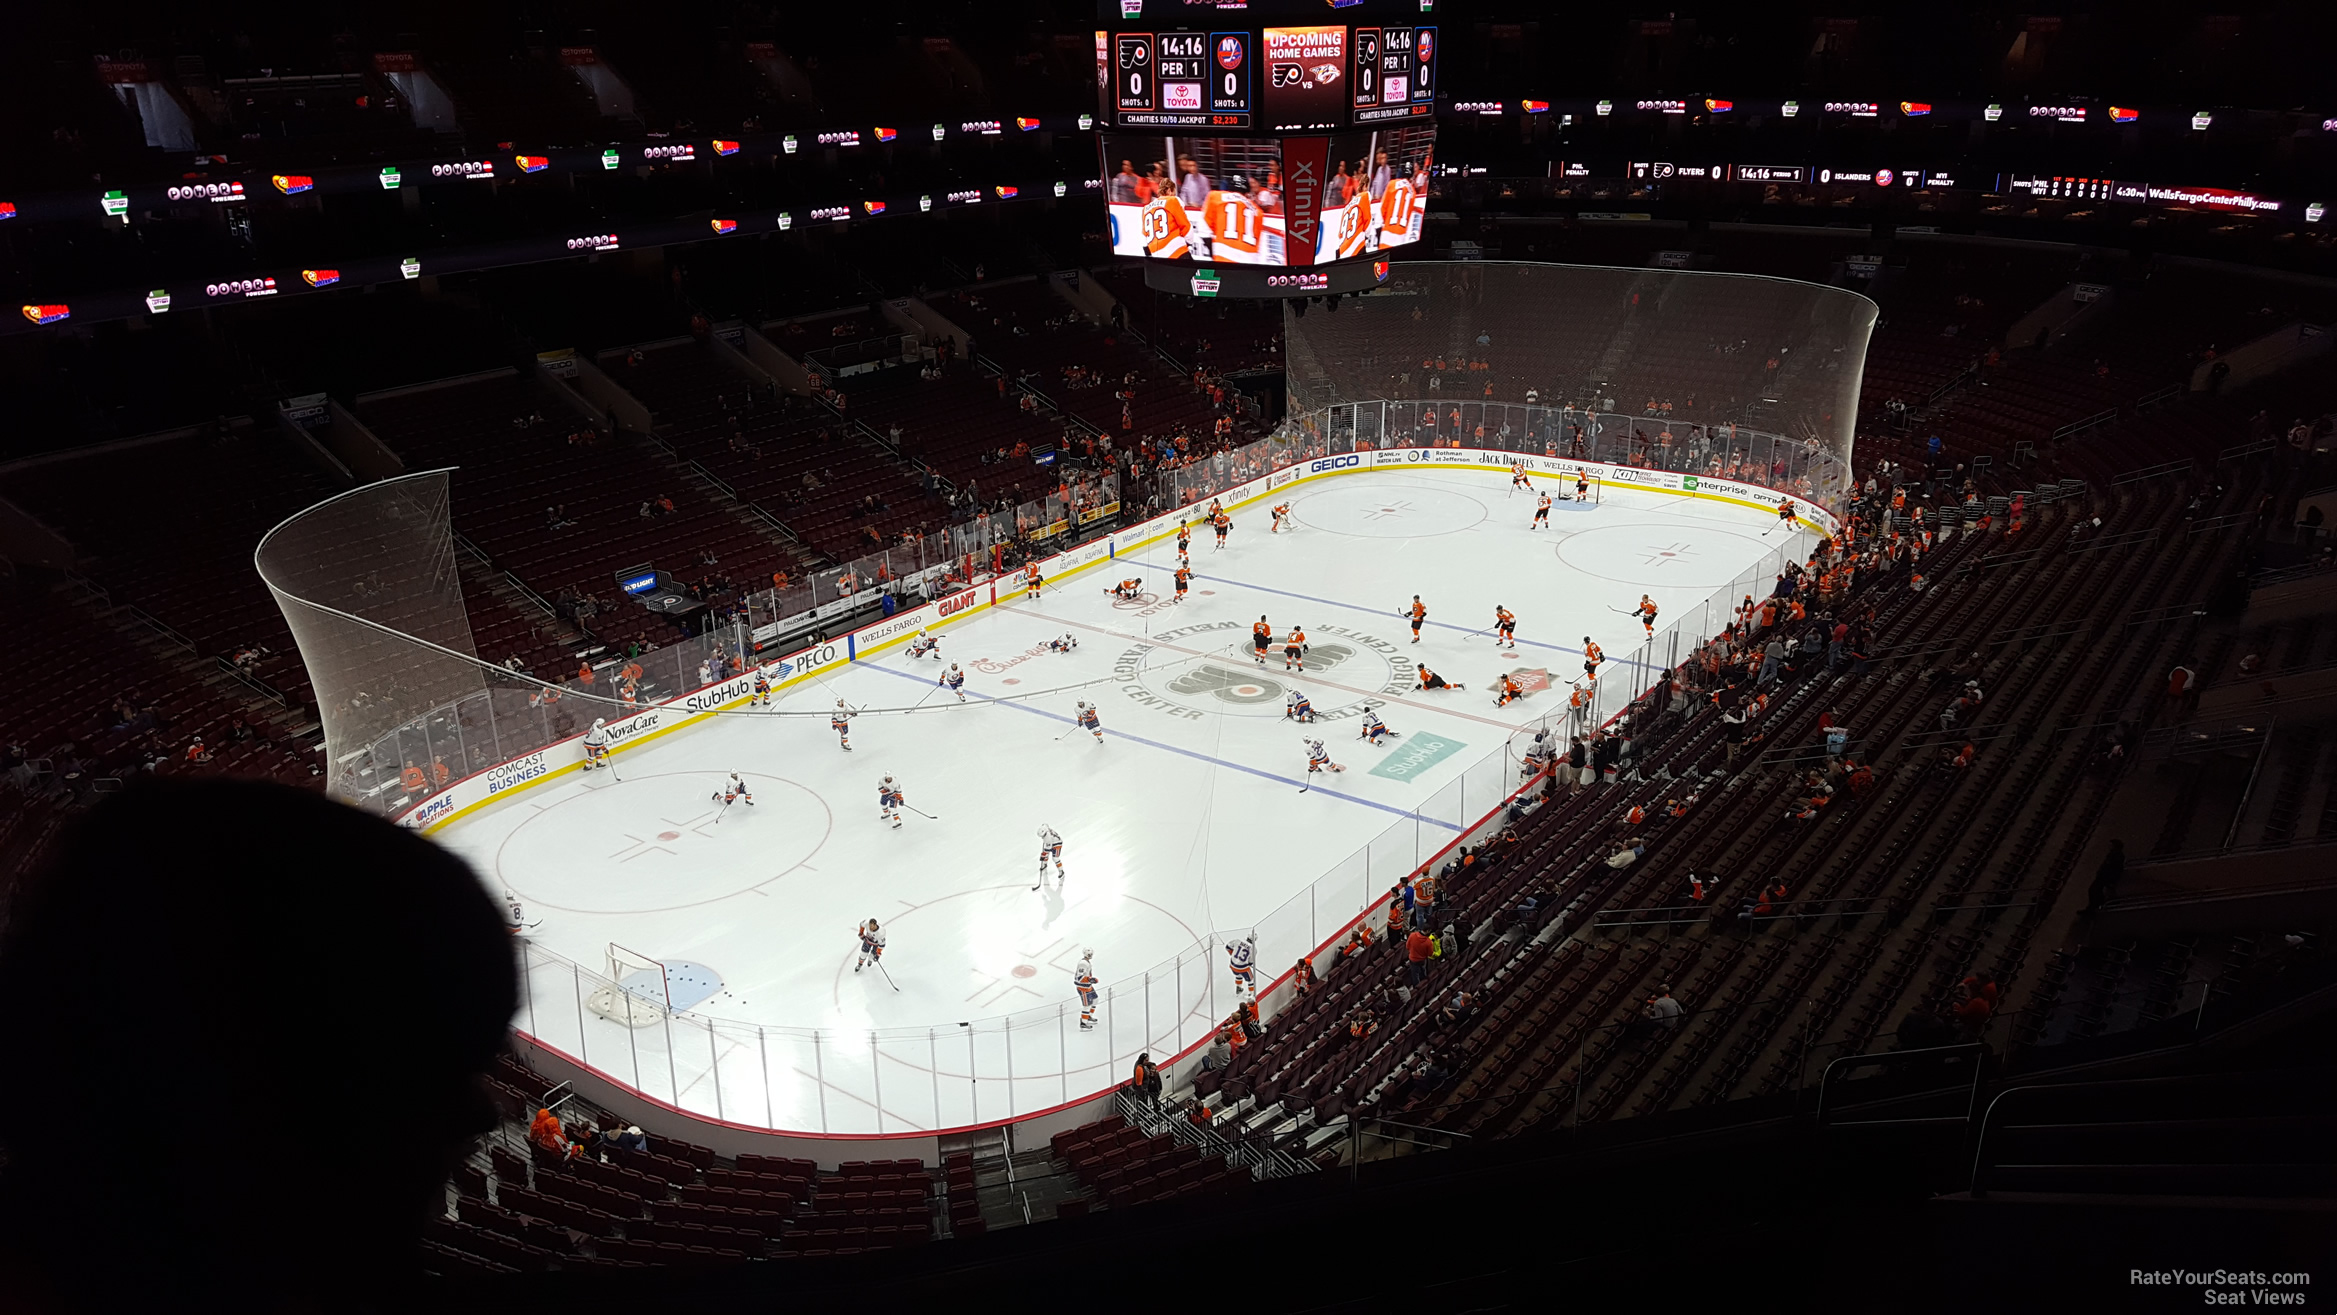 section 209a, row 8 seat view  for hockey - wells fargo center